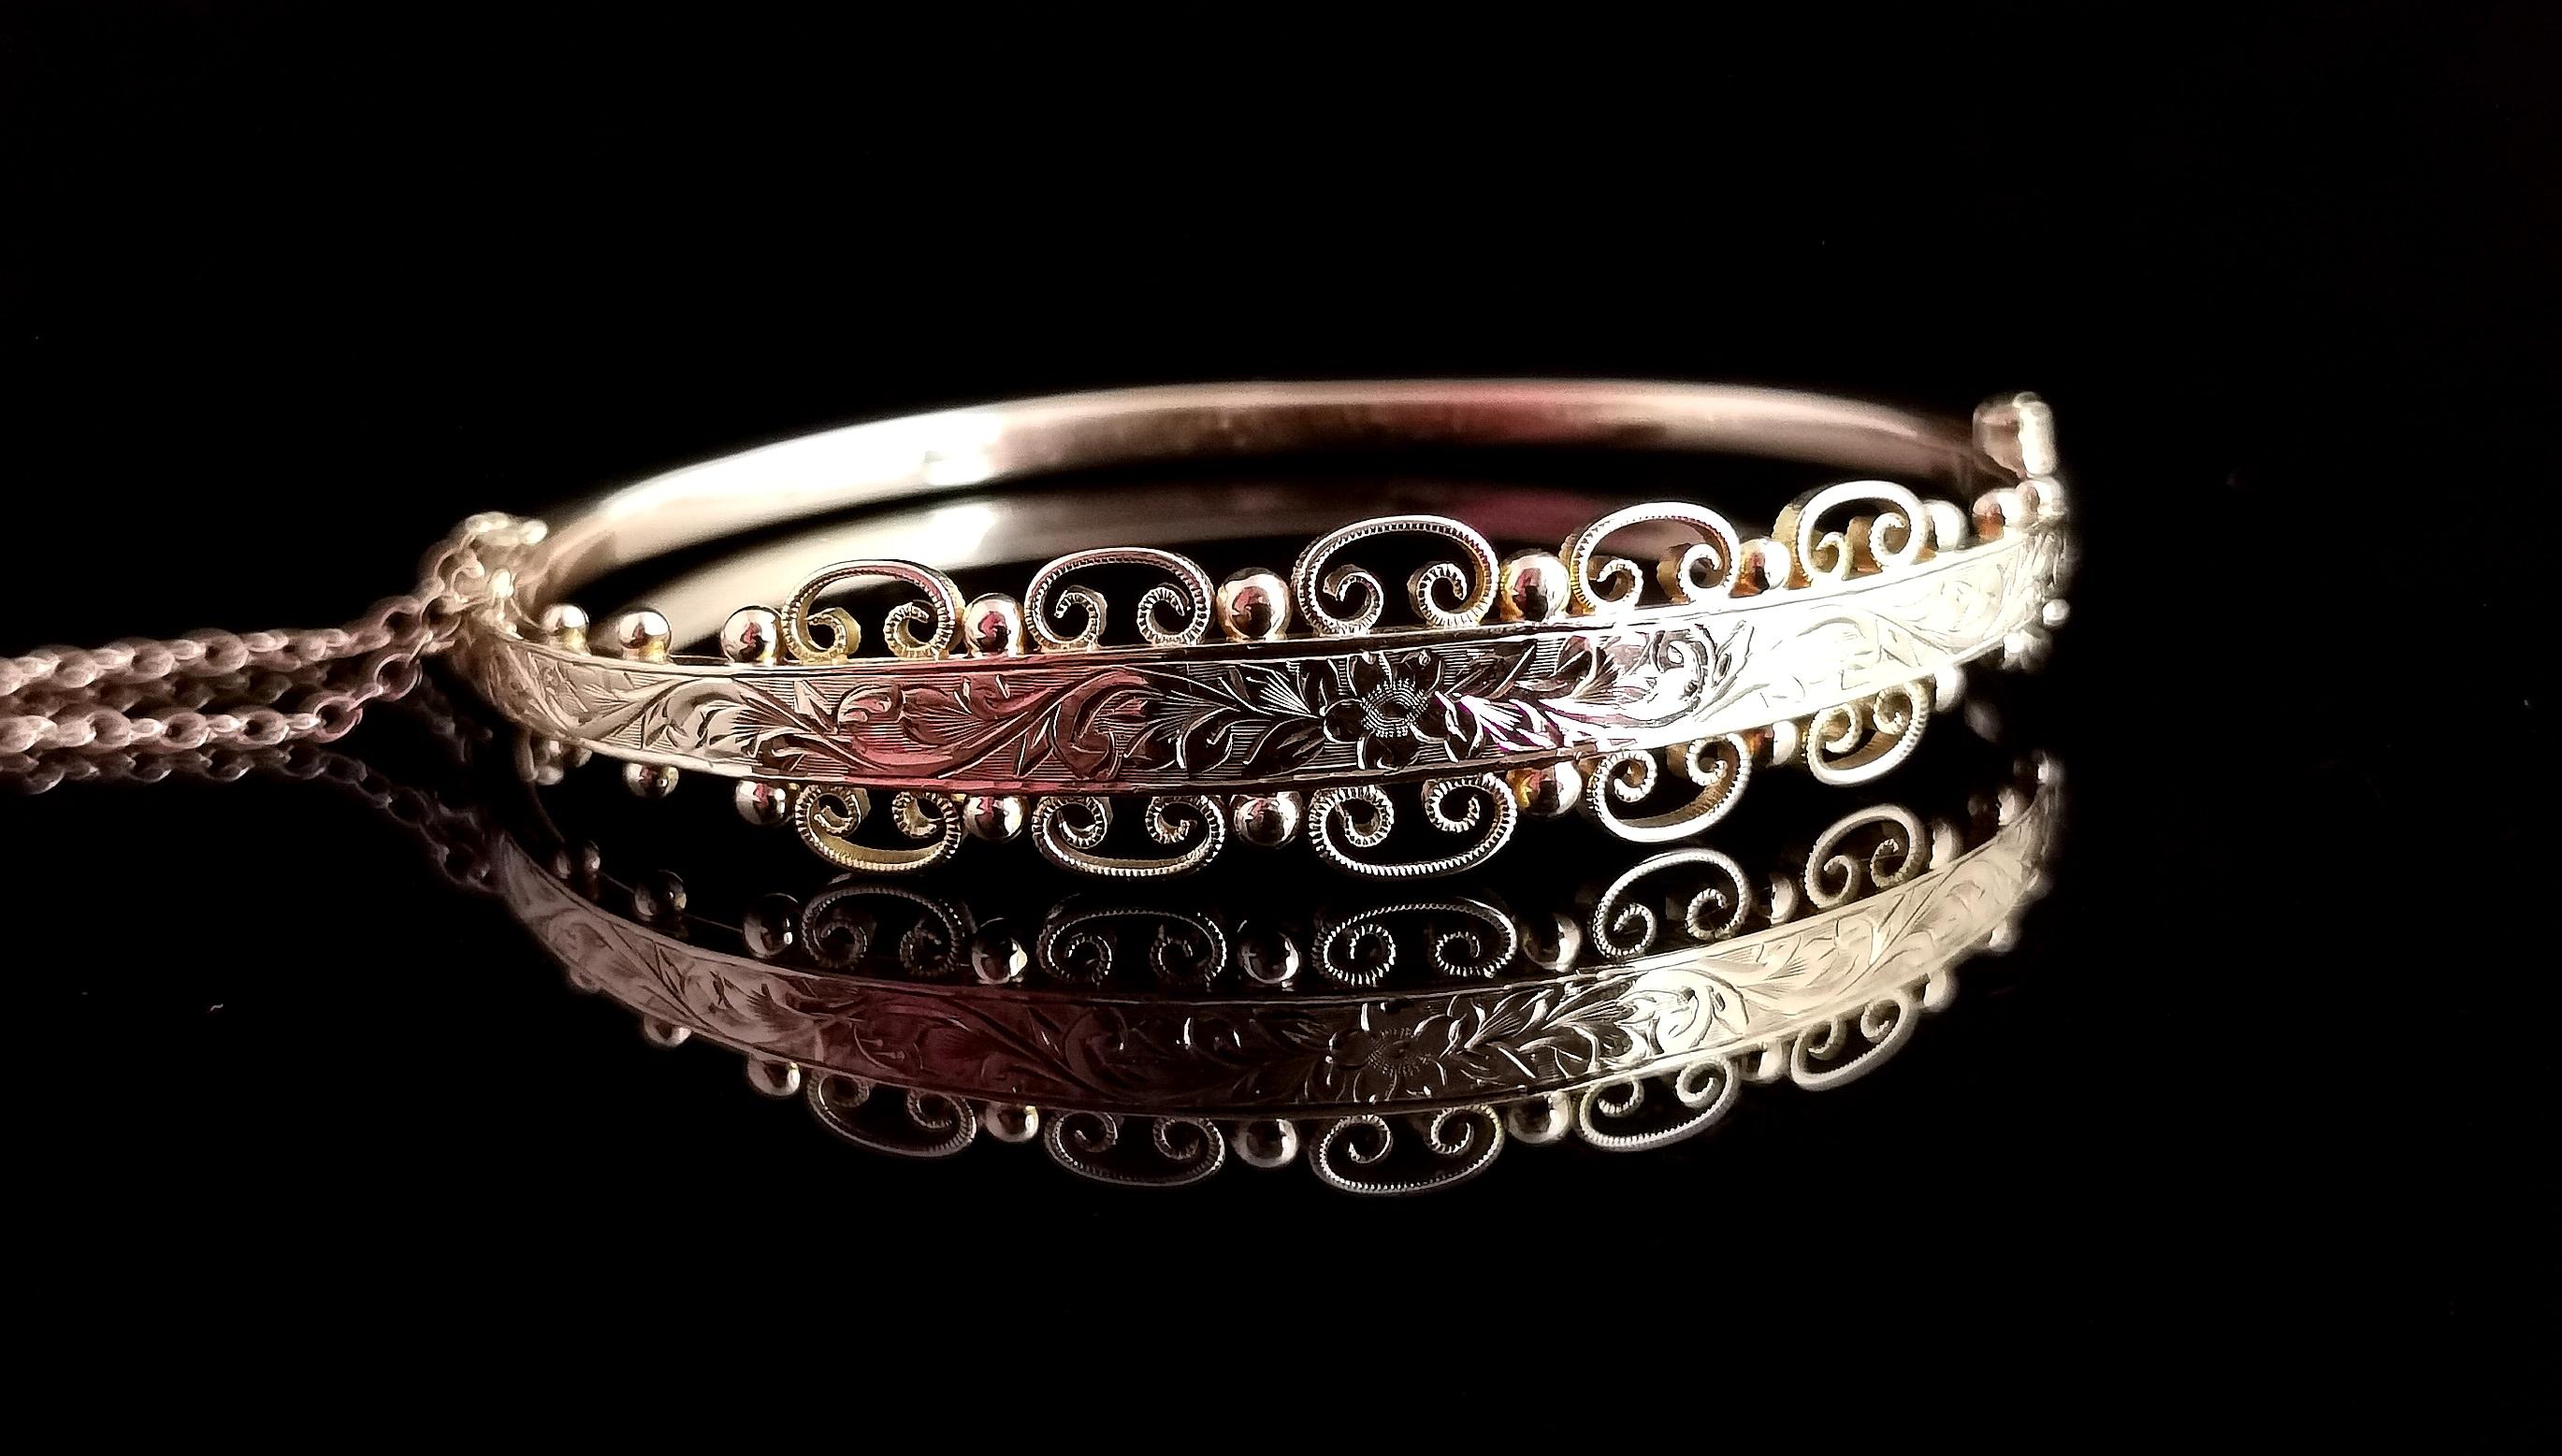 A superb antique Edwardian 9kt gold floral engraved bangle.

A very pretty design with a slim plain polished back.

The front is wider with an elaborate floral engraving bordered by gold beading and scroll work.

A truly beautiful and intricate